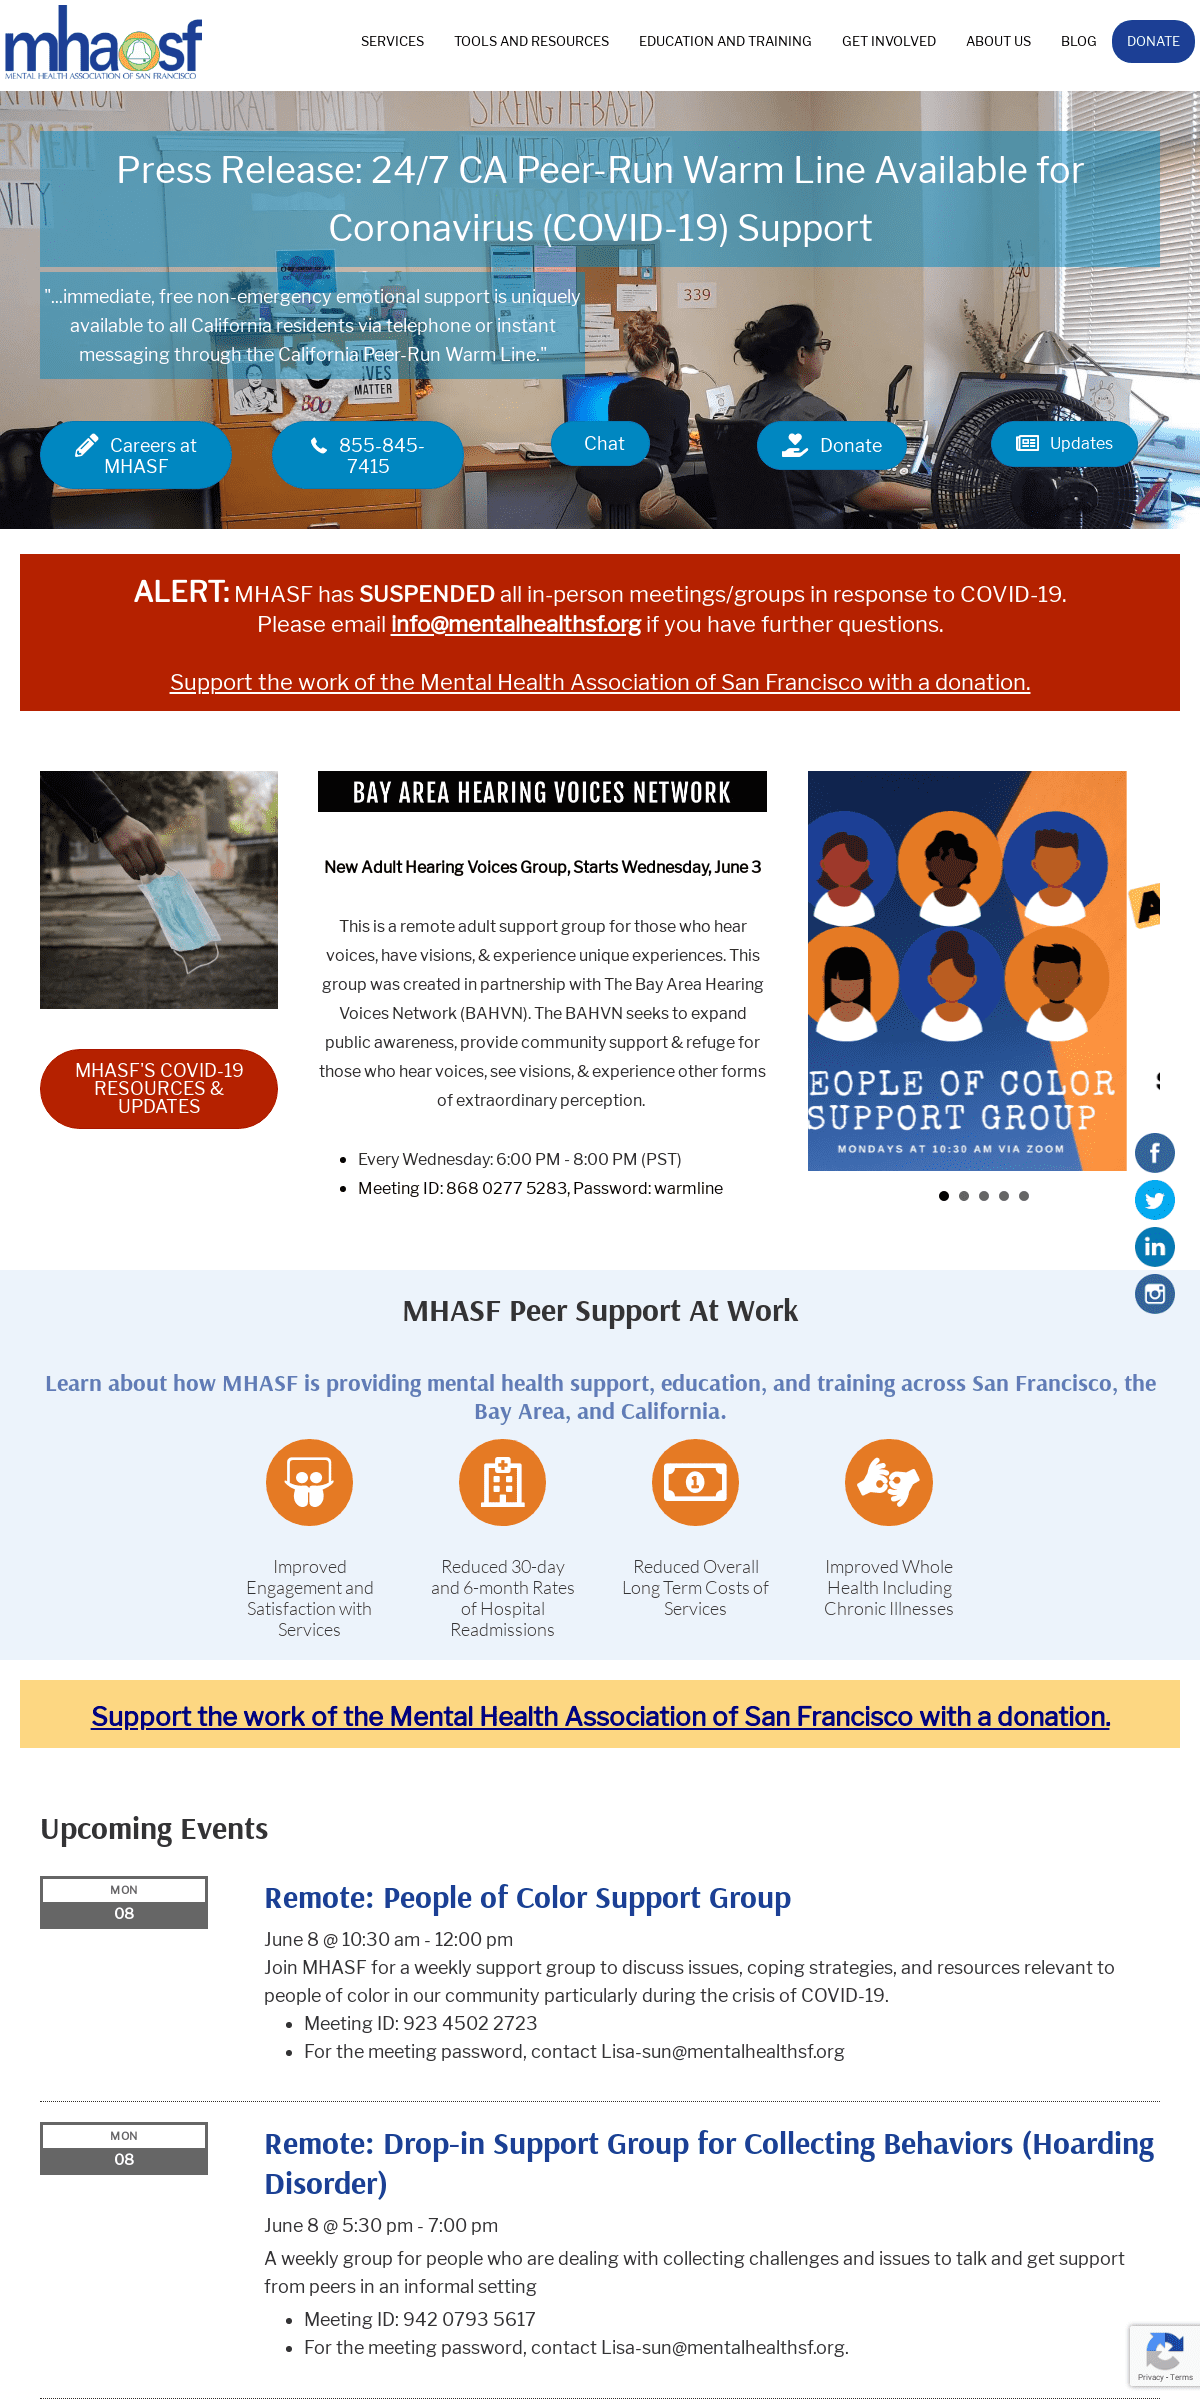 A complete backup of mentalhealthsf.org